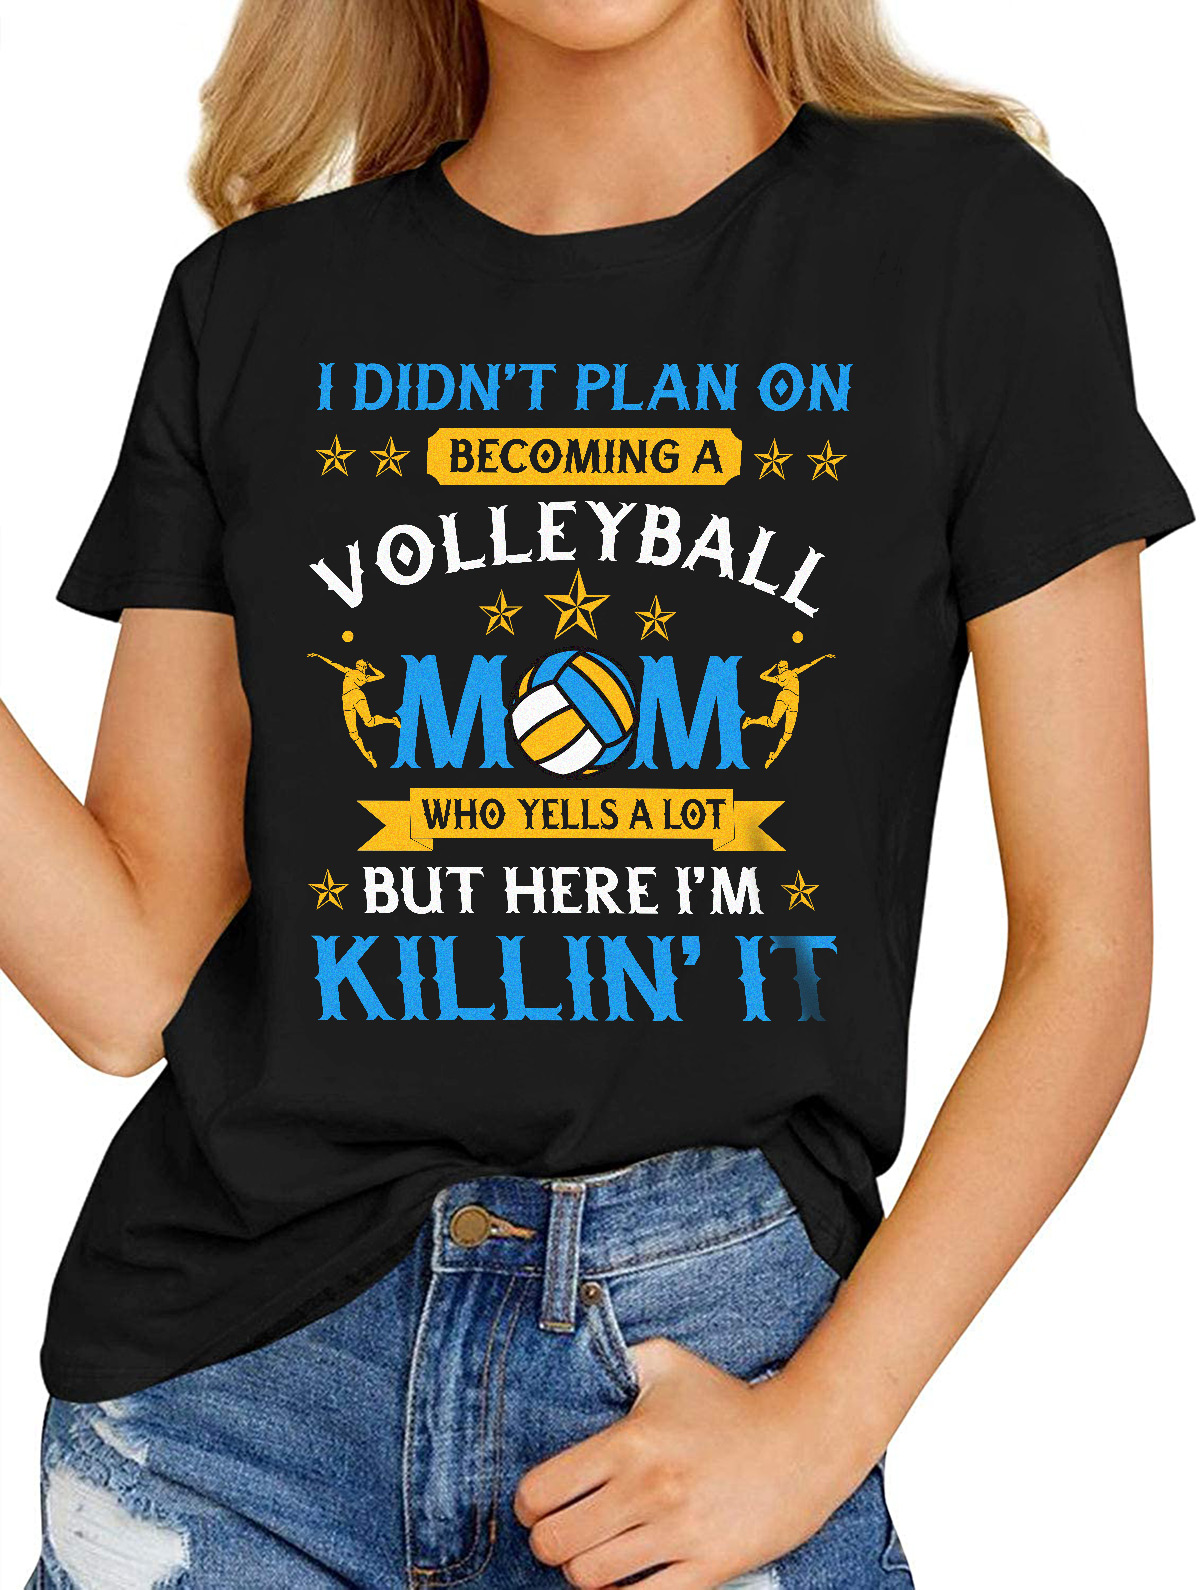 Women's Fashion T-Shirts – Becoming A Volleyball Mom And Killin It Mother Day Gift Shirt – Crew Short Sleeve – HomeWix